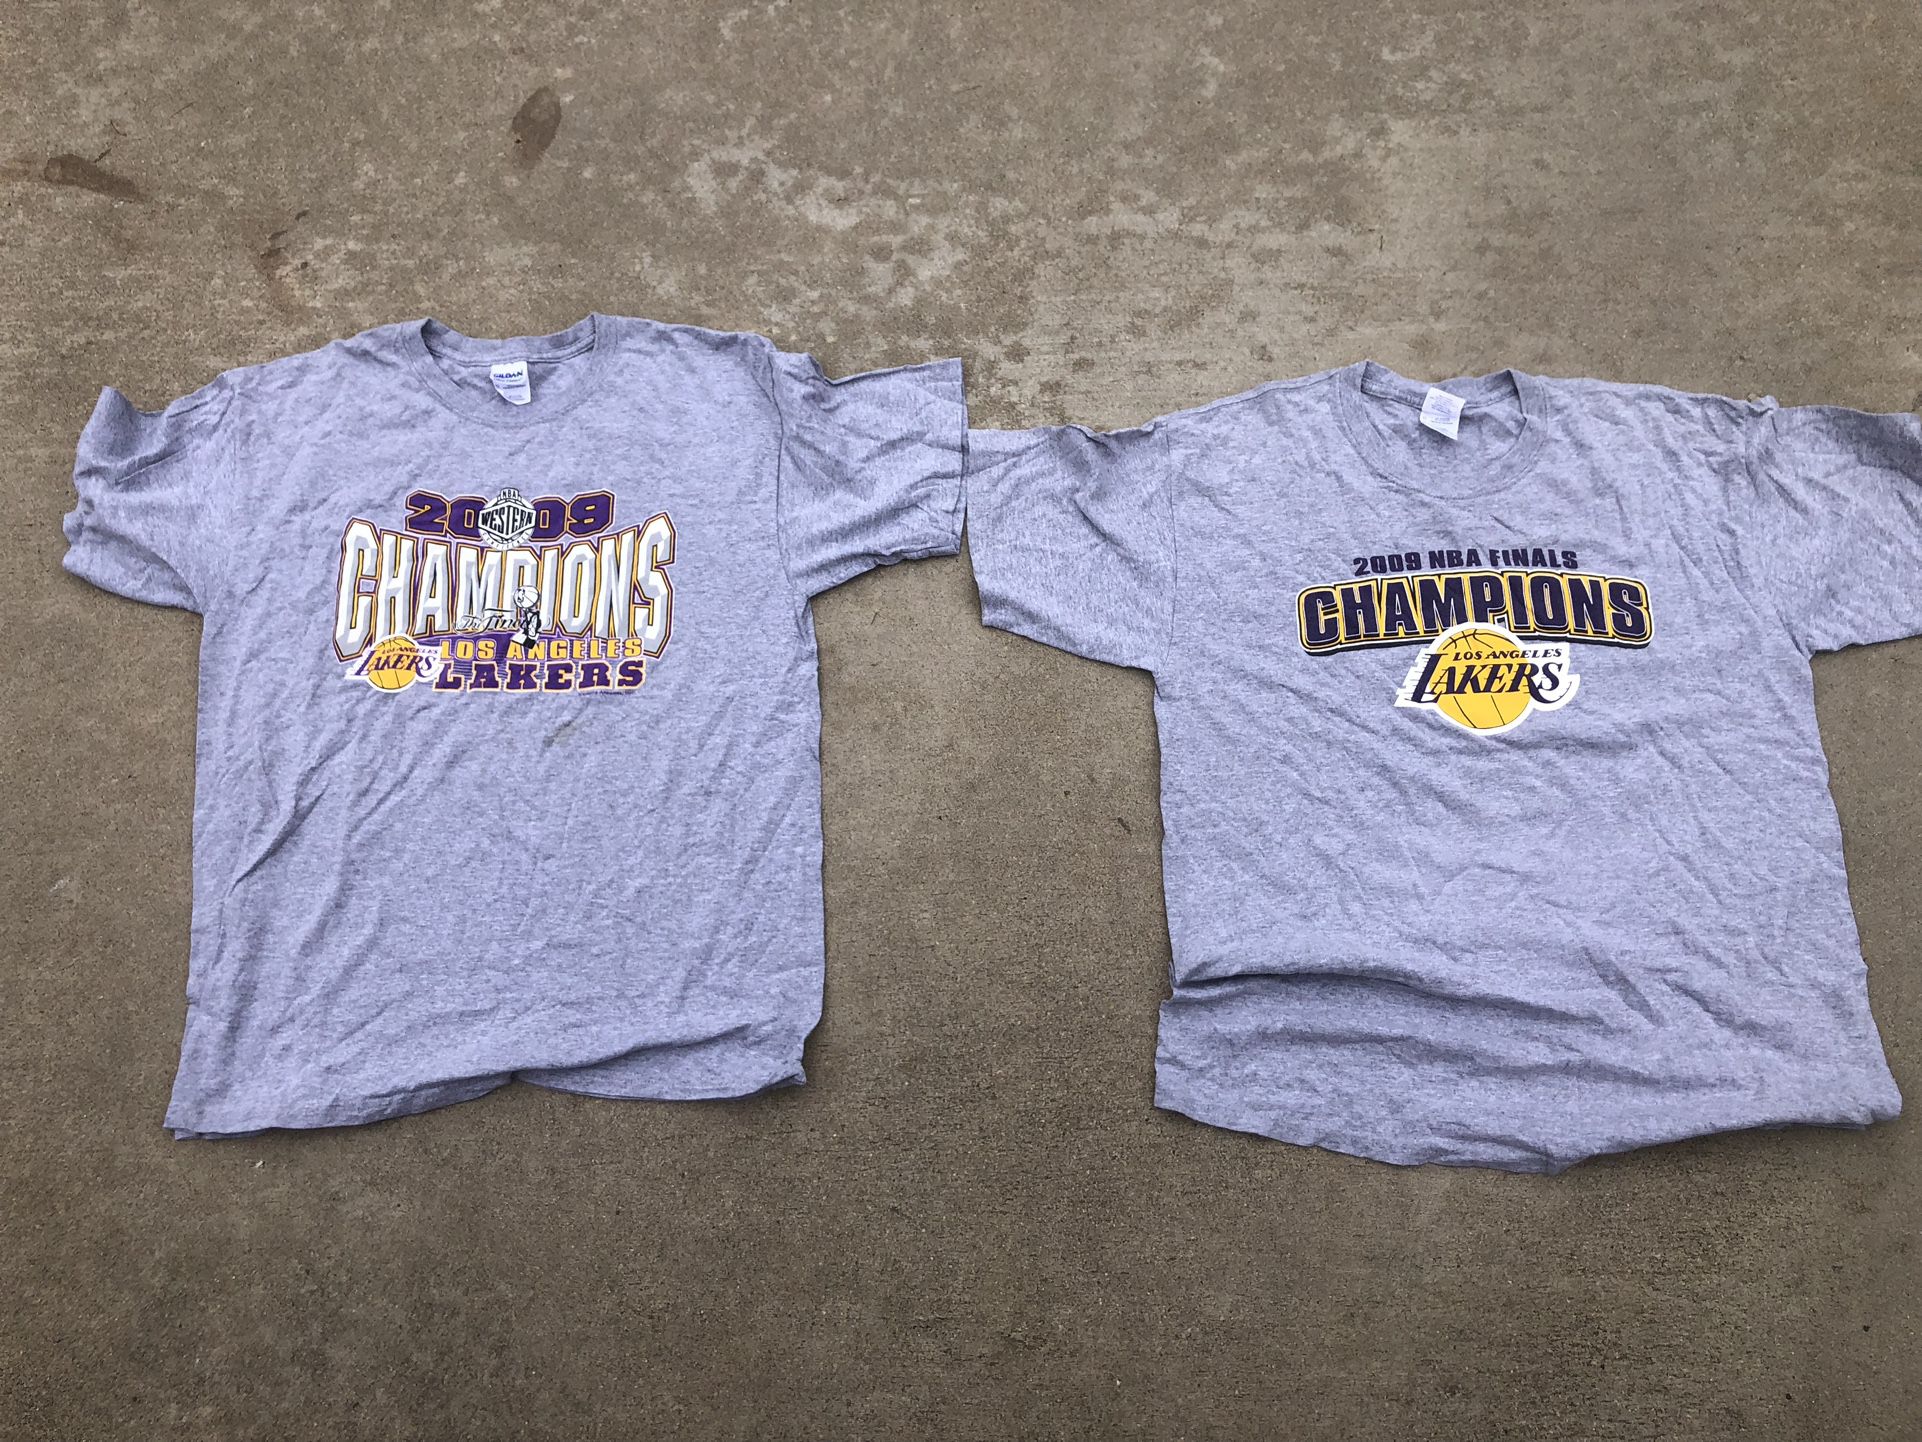 Vintage Lakers Championship 2009 Shirts Both Large for Sale in La Habra  Heights, CA - OfferUp